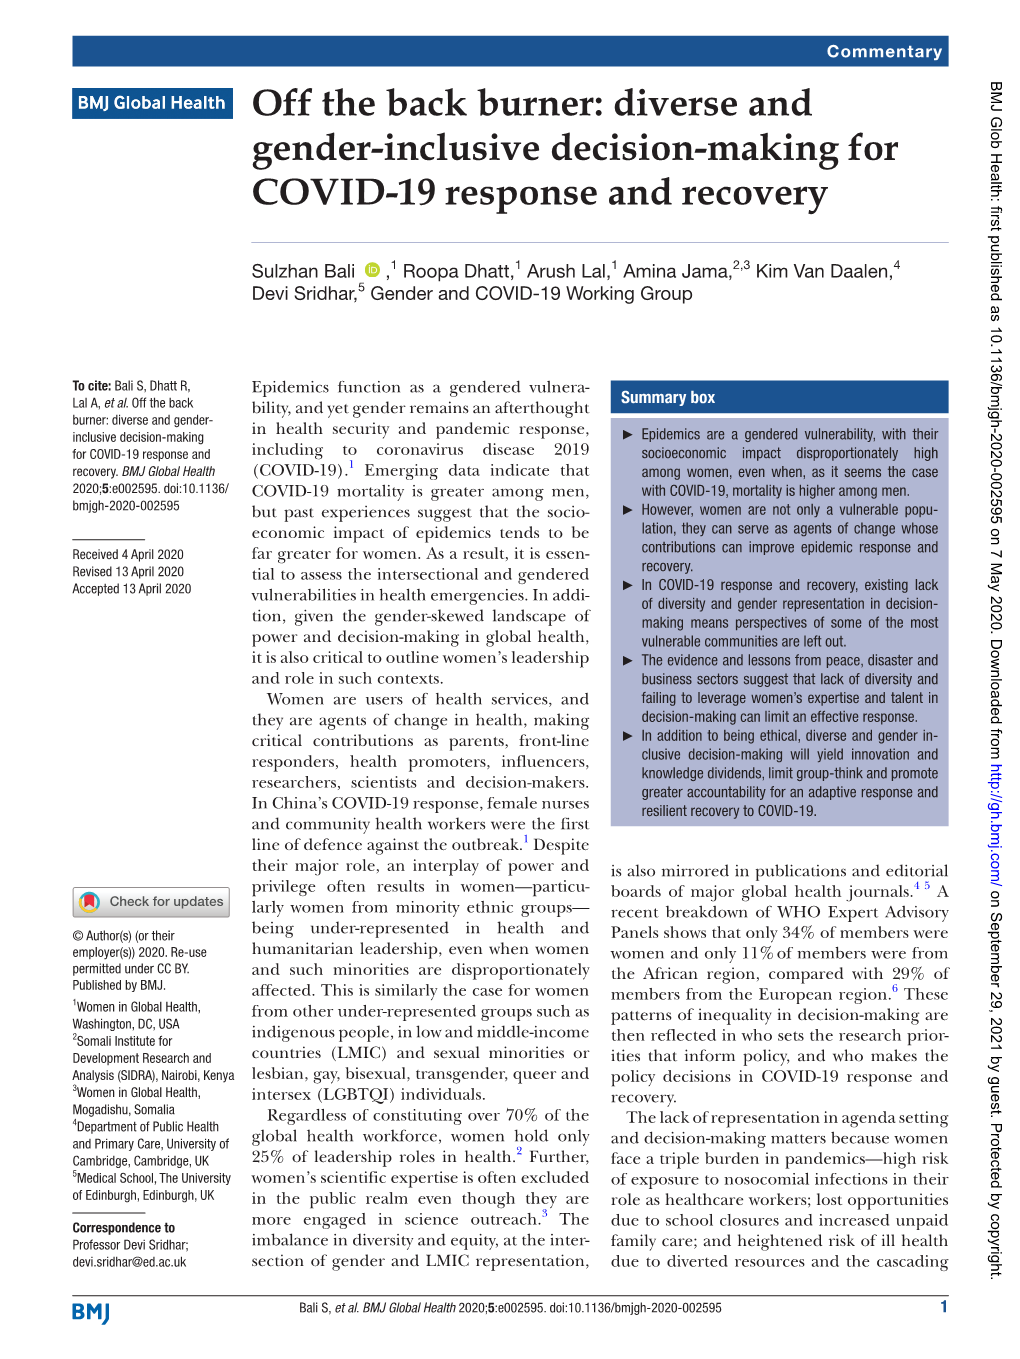 Diverse and Gender-Inclusive Decision-Making for COVID-19 Response